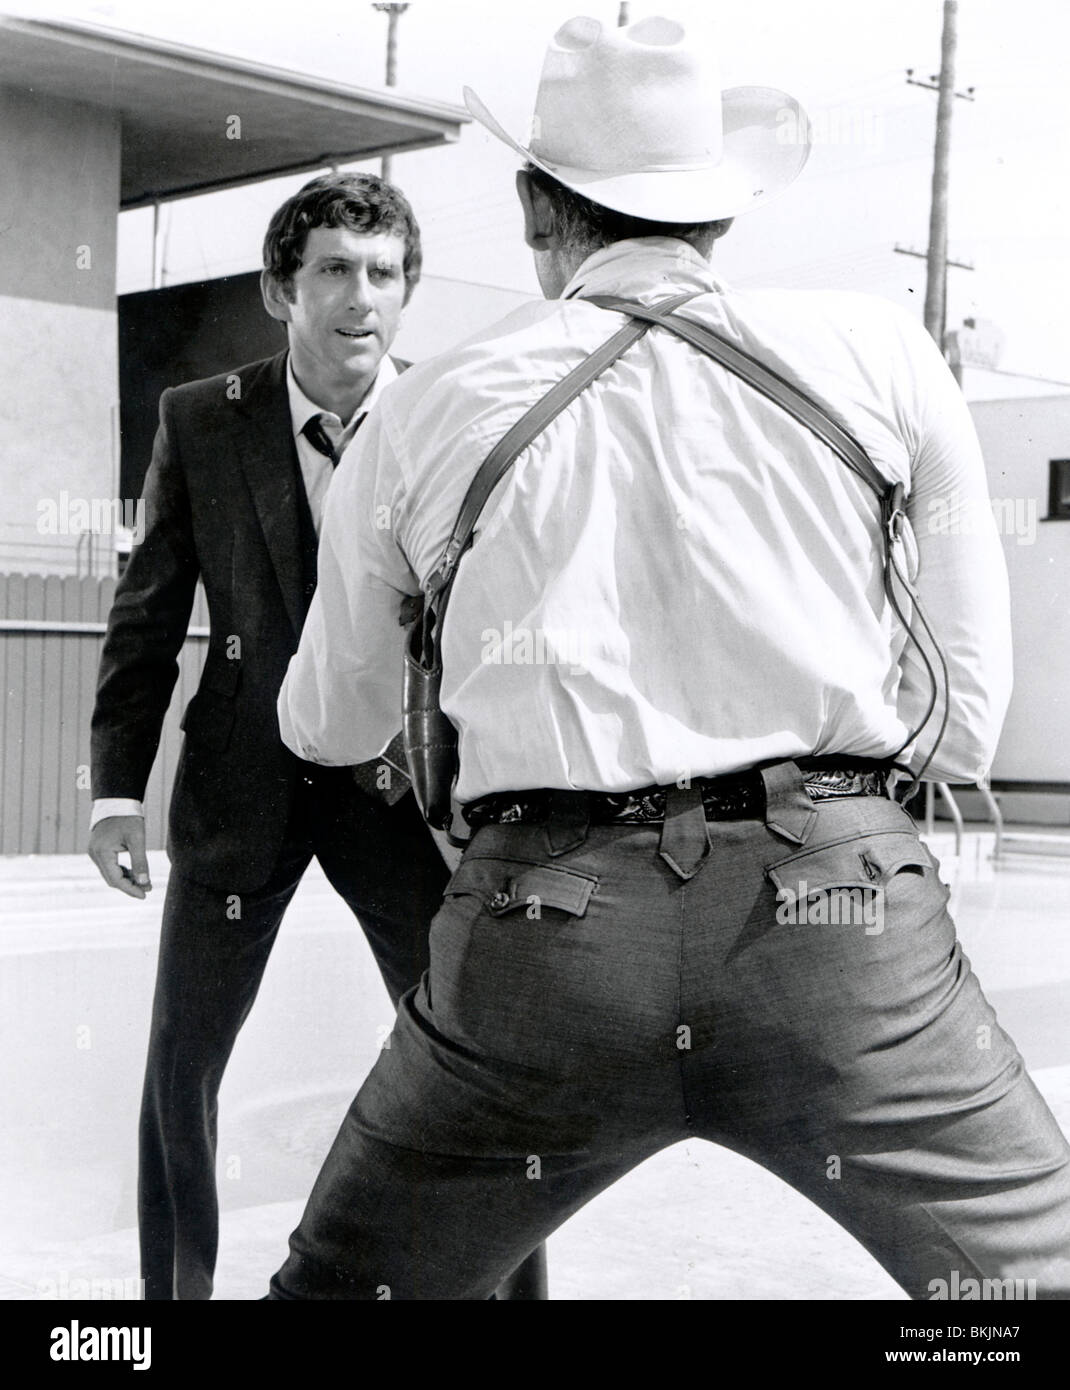 THE LAWYER (1970) BARRY NEWMAN LWYR 001 P Stock Photo